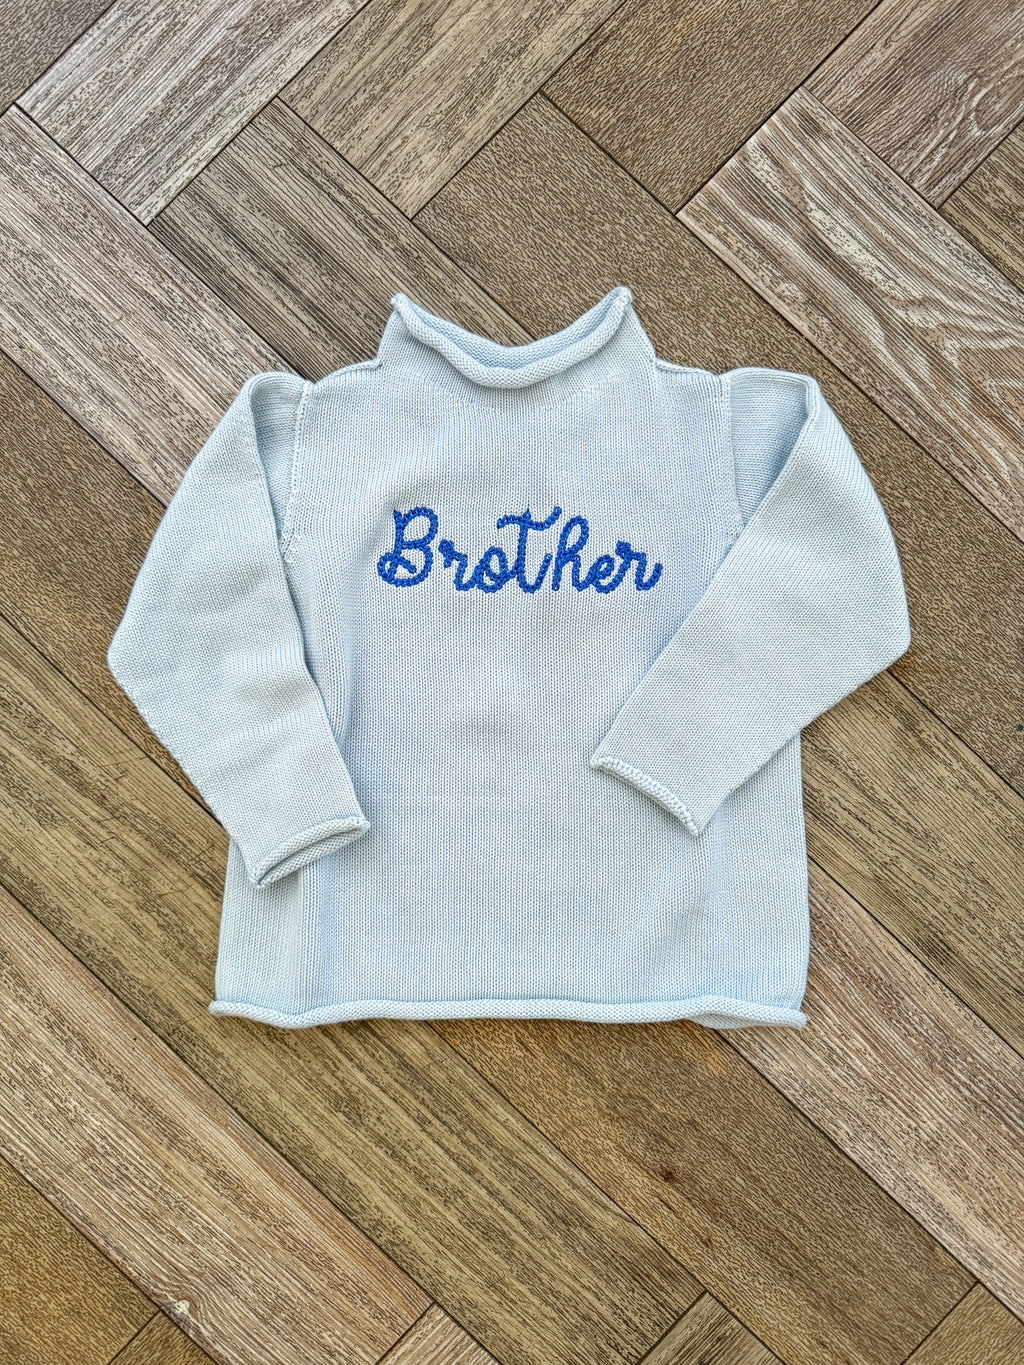 A Soft Idea Roll Neck Sweater in Light Blue with Brother